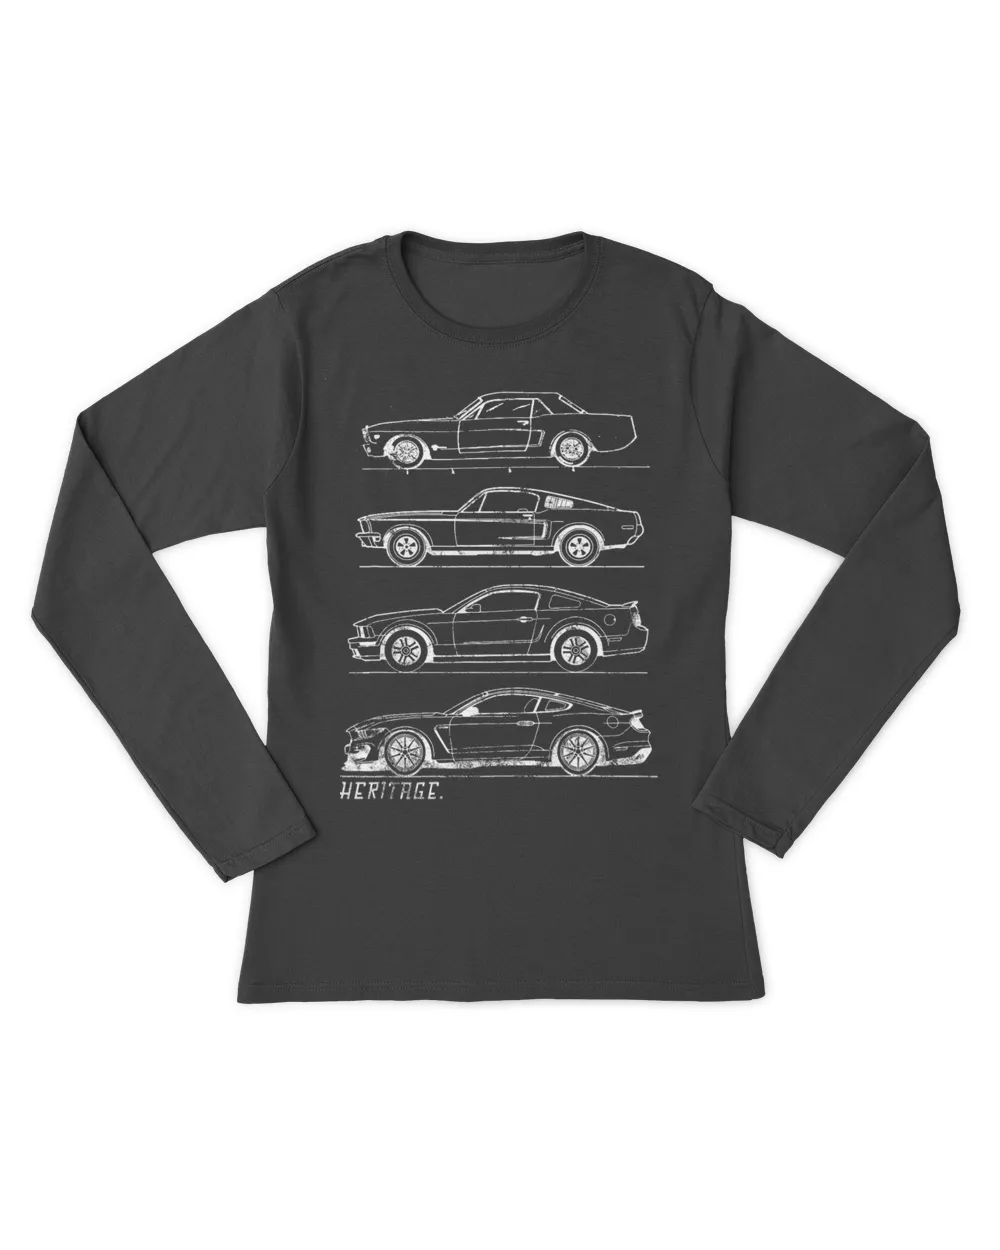 Classic Old School Muscle Car Evolution Heritage Design